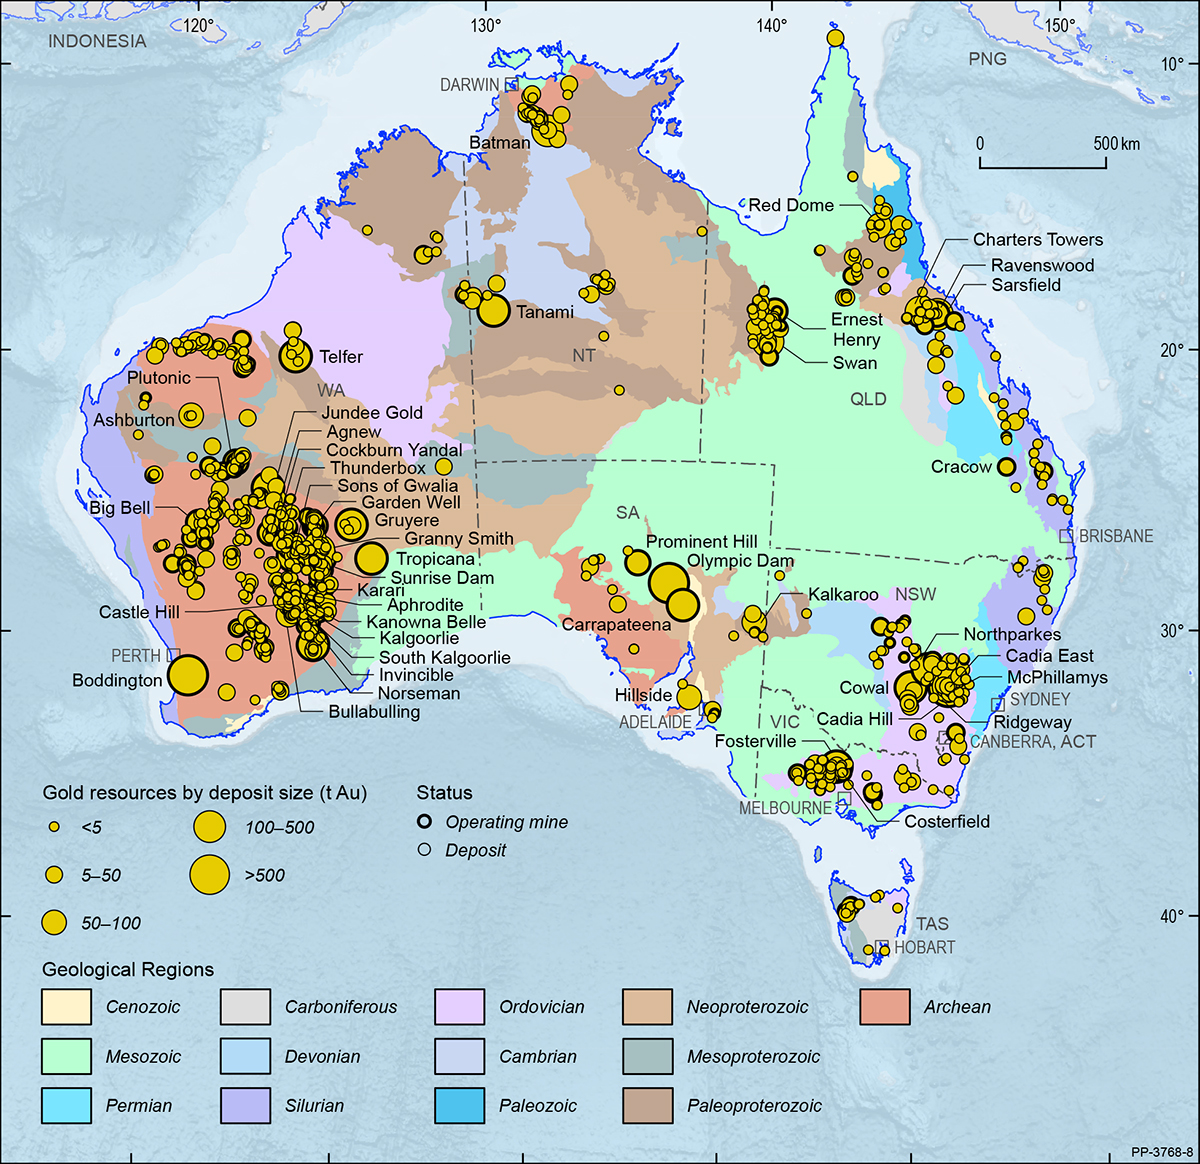 A map showing the Australian continent shaded by the ages of the main geological provinces highlighting the geographical distribution of Australian gold deposits and operating mines in 2019.